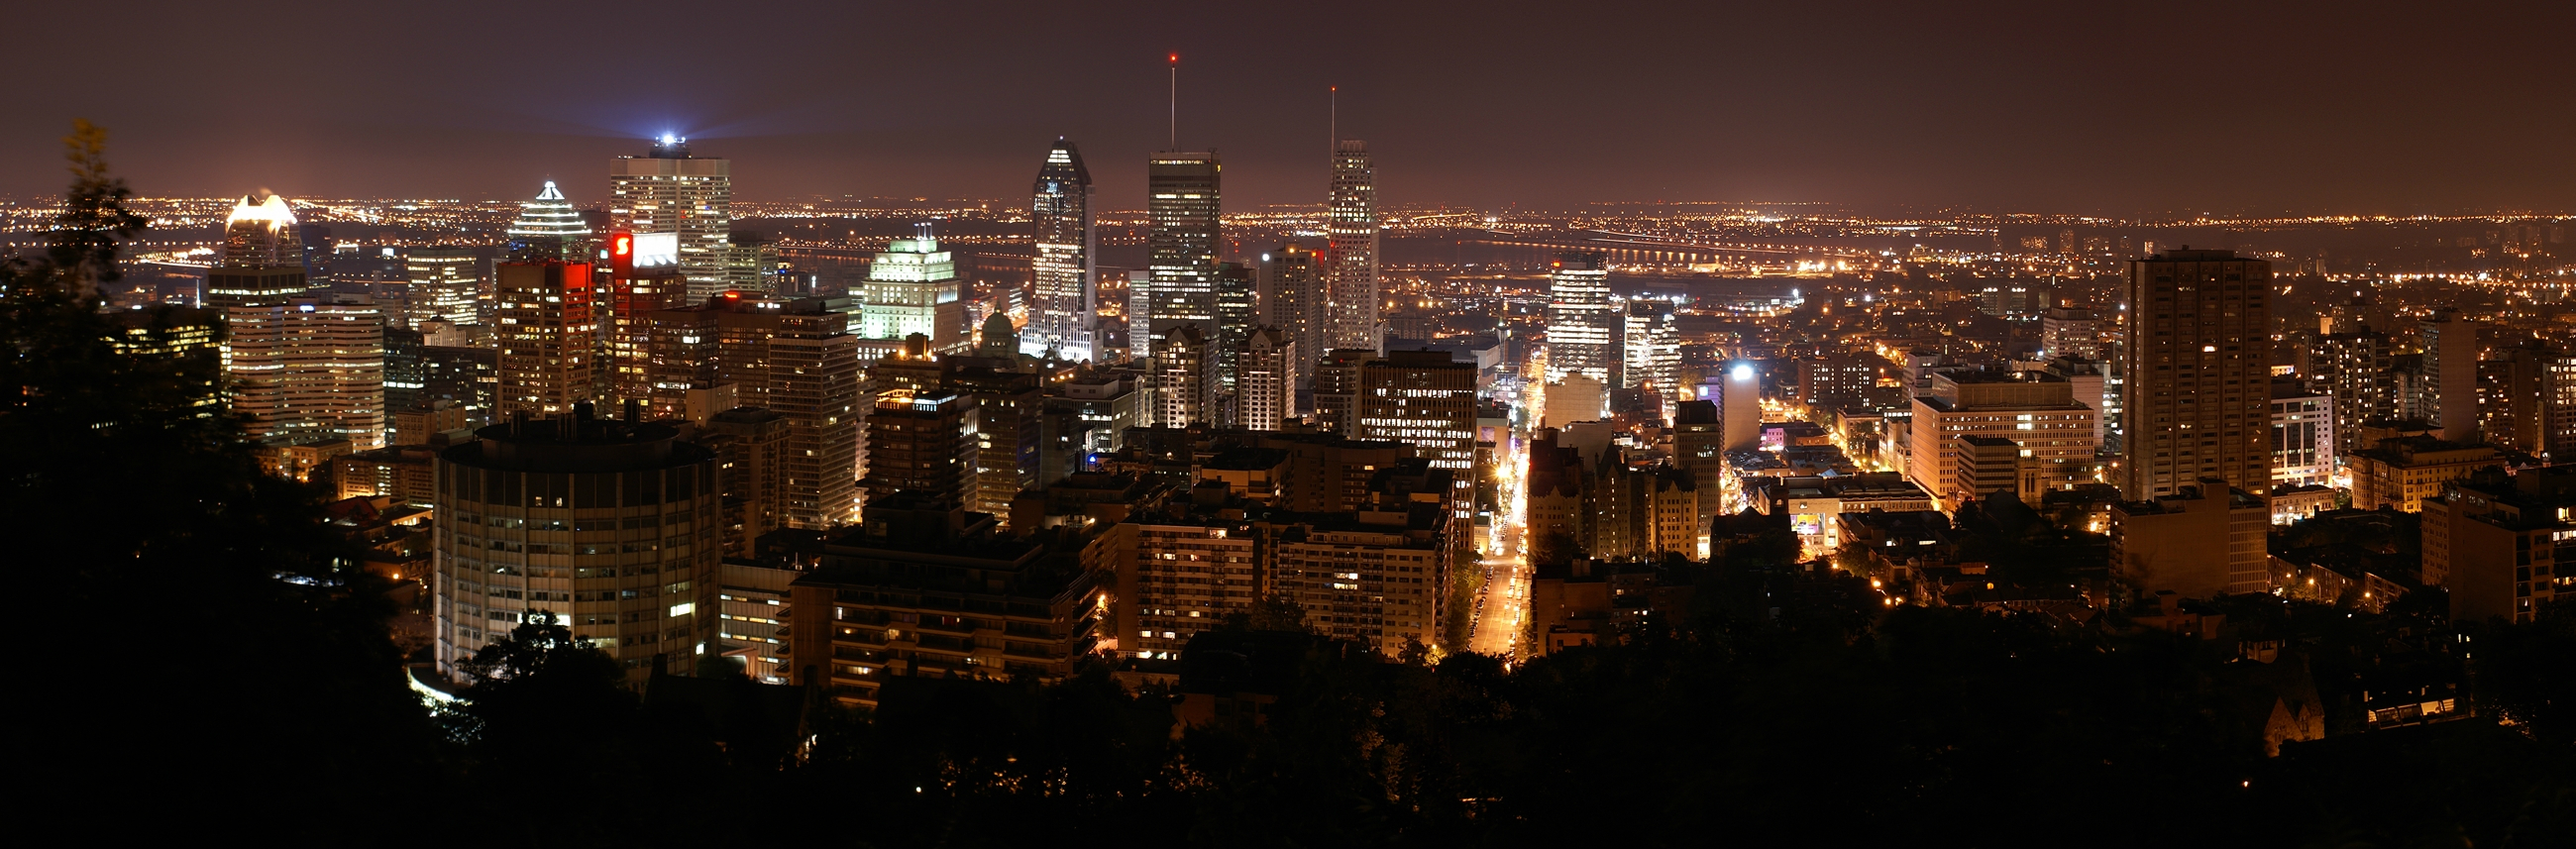 man made, montreal, cities